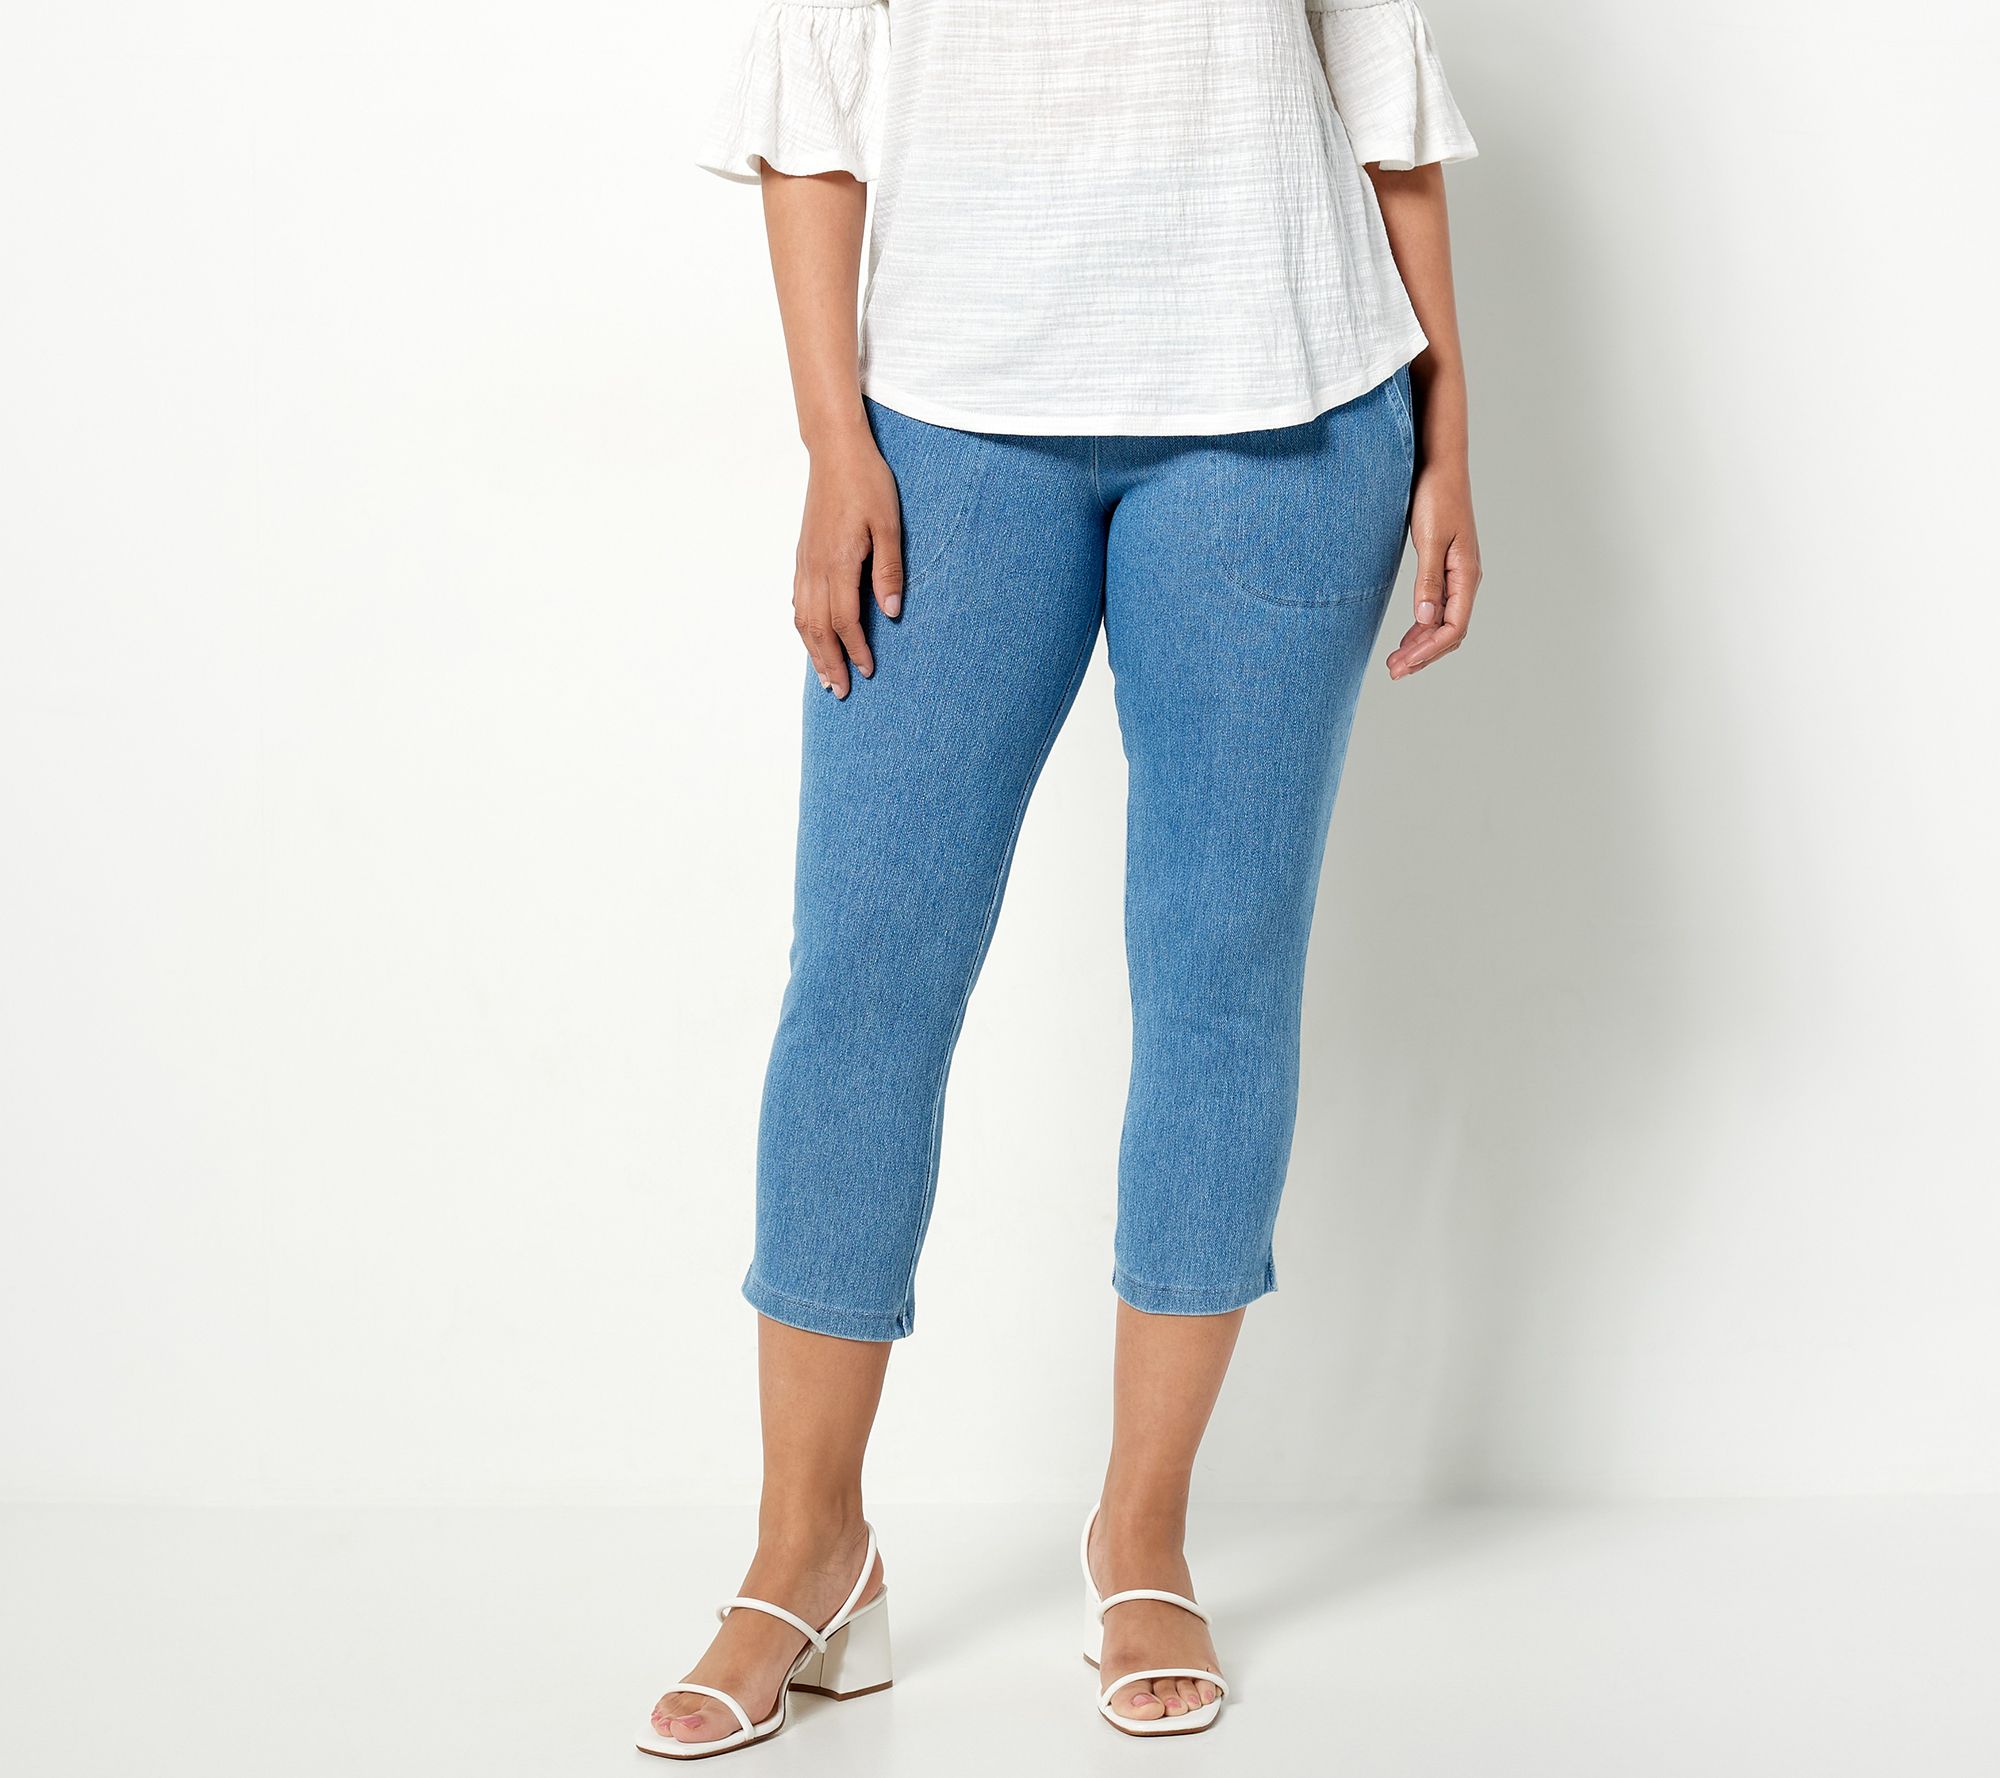  Stretch Jeans For Women Crop Pants For Women Loose